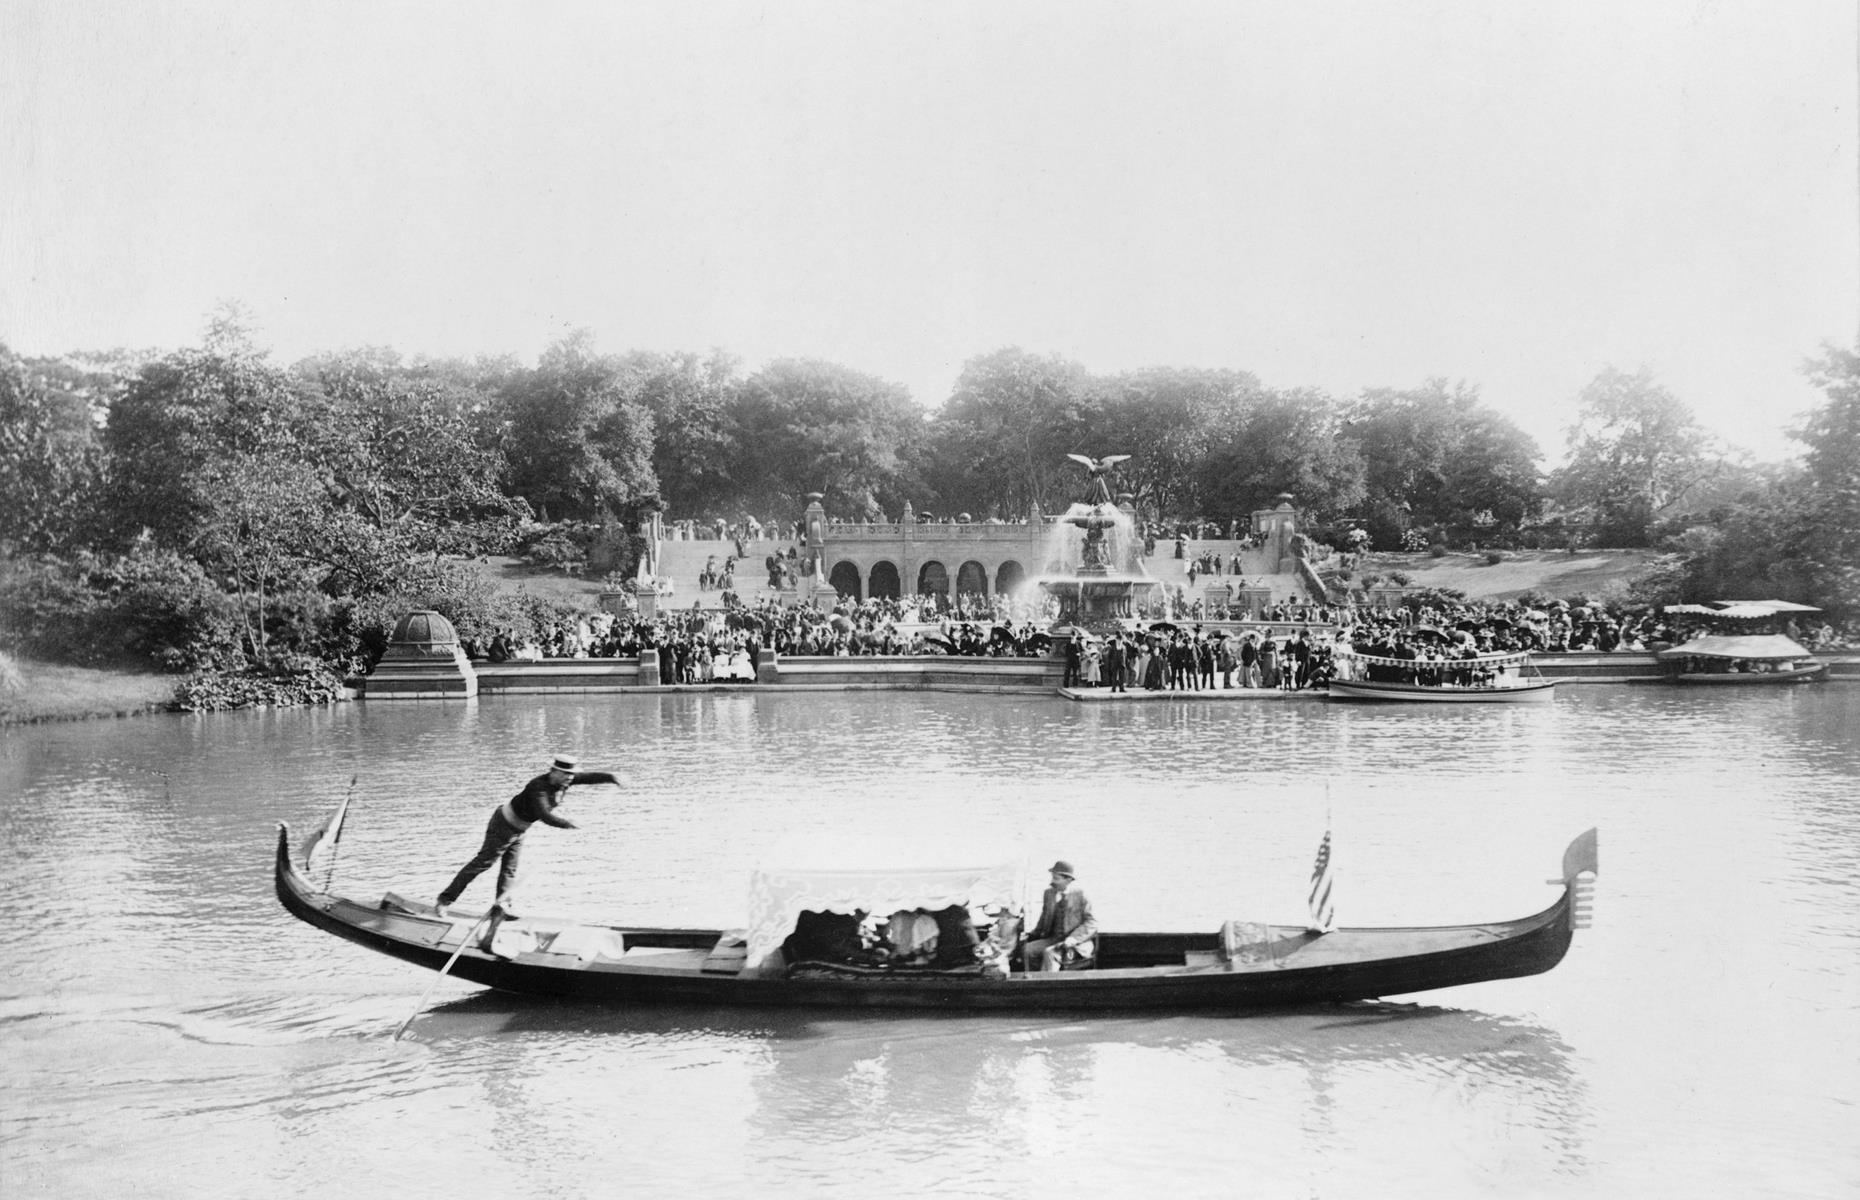 <p>When Central Park officially opened in 1876 it became instantly popular with New Yorkers, with activities including gondolier trips on the lake (pictured here in 1894), carriage rides and model yacht racing favoured by early visitors. The 840-acre park is one of the world’s top attractions today and received <a href="https://www.statista.com/statistics/190057/number-of-visitors-to-city-parks-in-the-us-2009/#:~:text=The%20most%2Dvisited%20park%20was,42%20million%20visitors%20in%202019.">42 million</a> visitors last year.</p>